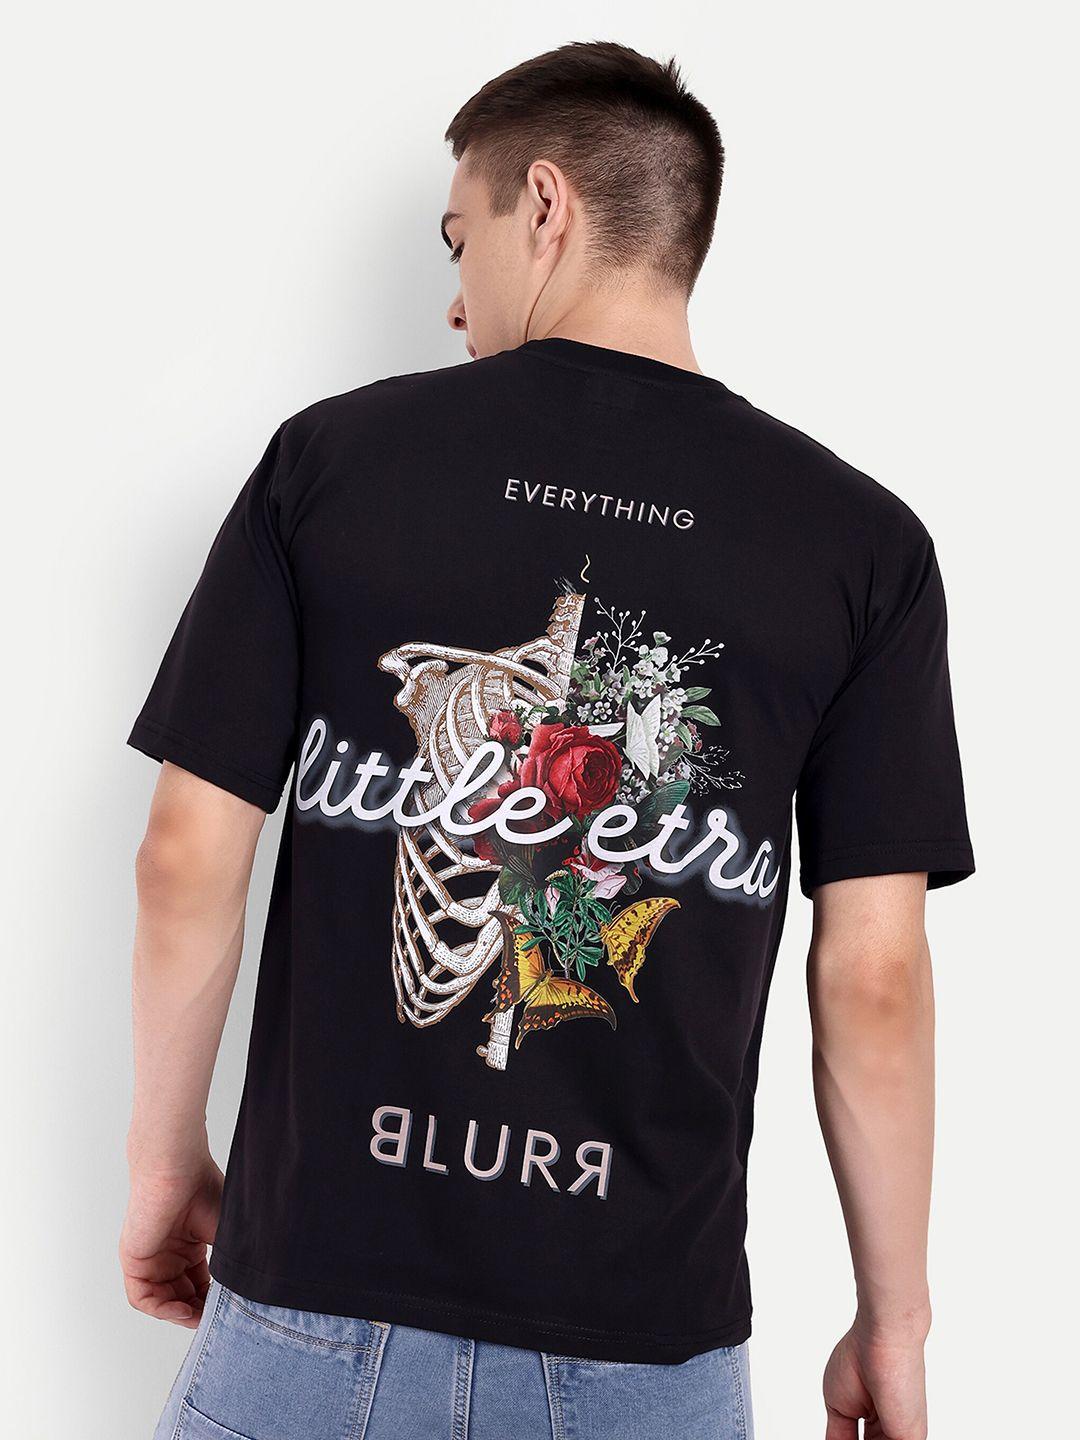 blurr graphic printed pure cotton oversized t-shirt